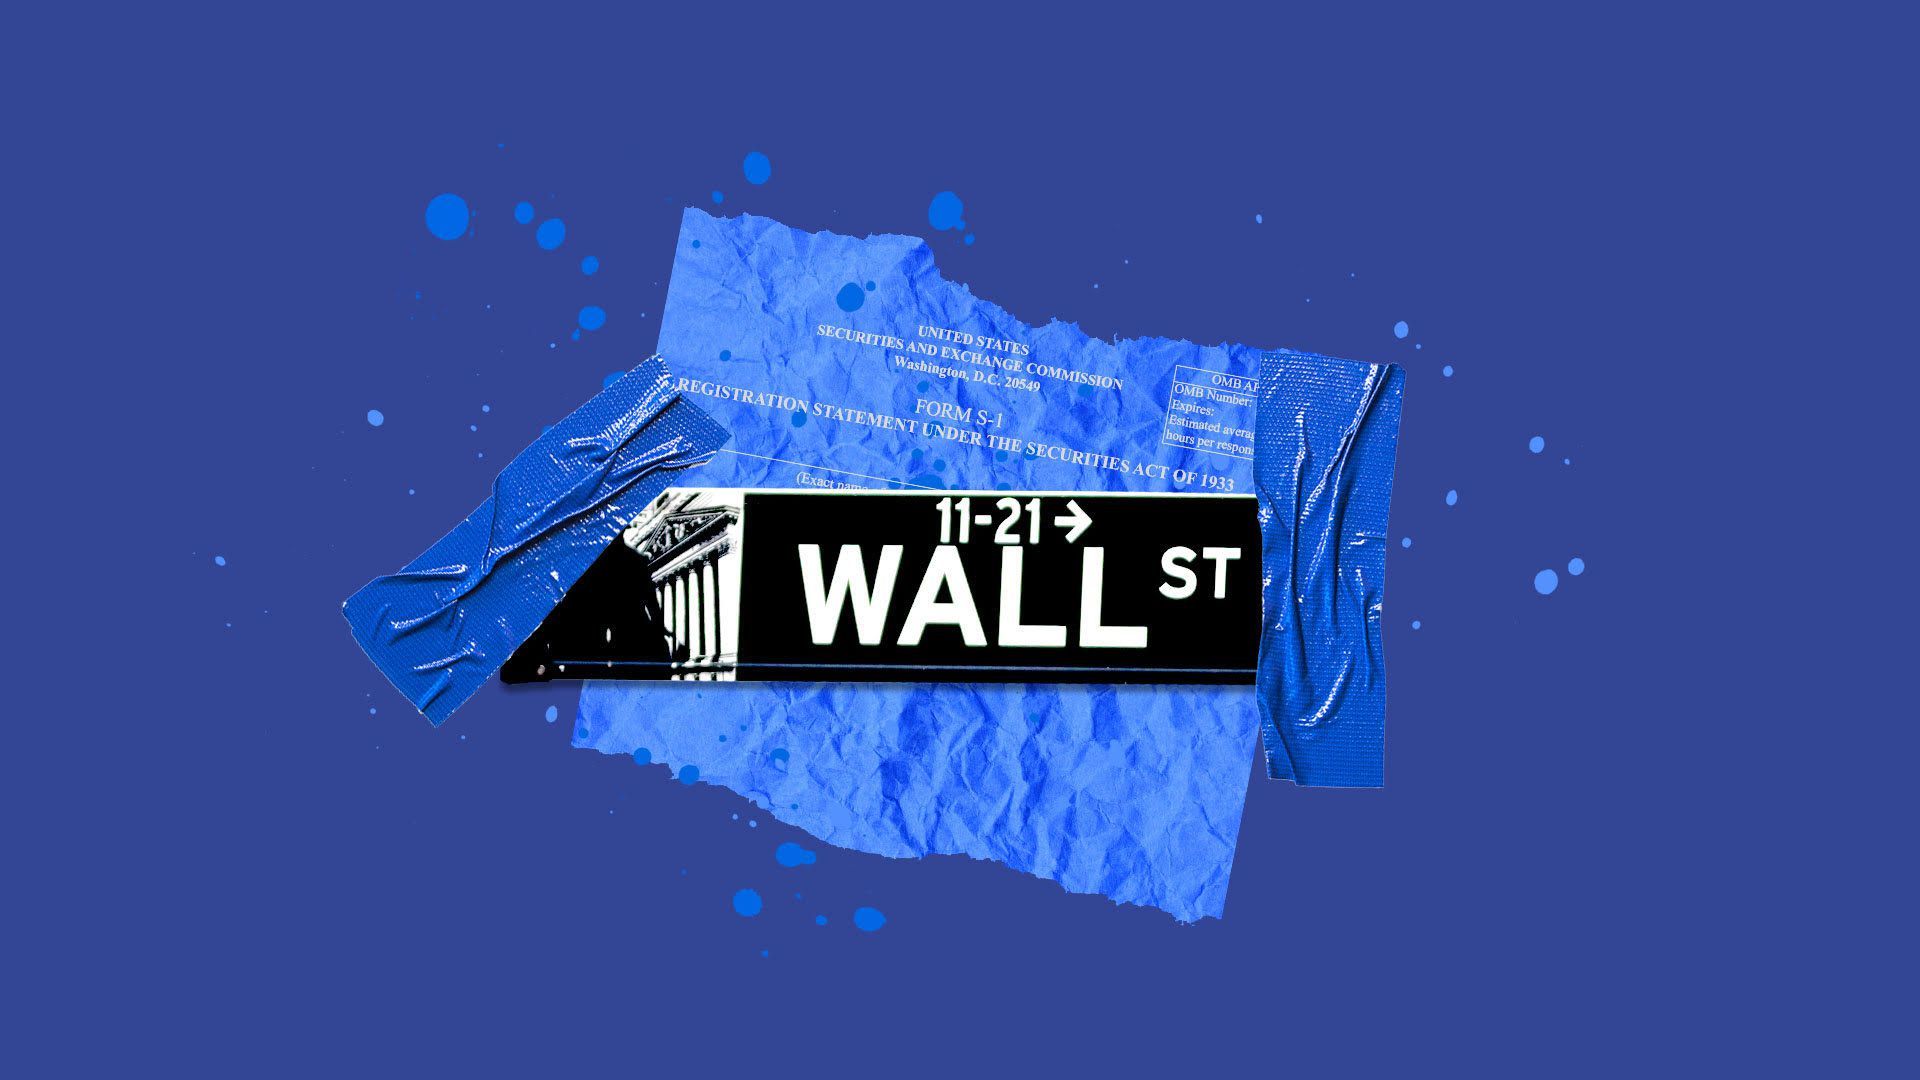 Collage illustration of the Wall Street street sign and IPO filing papers.